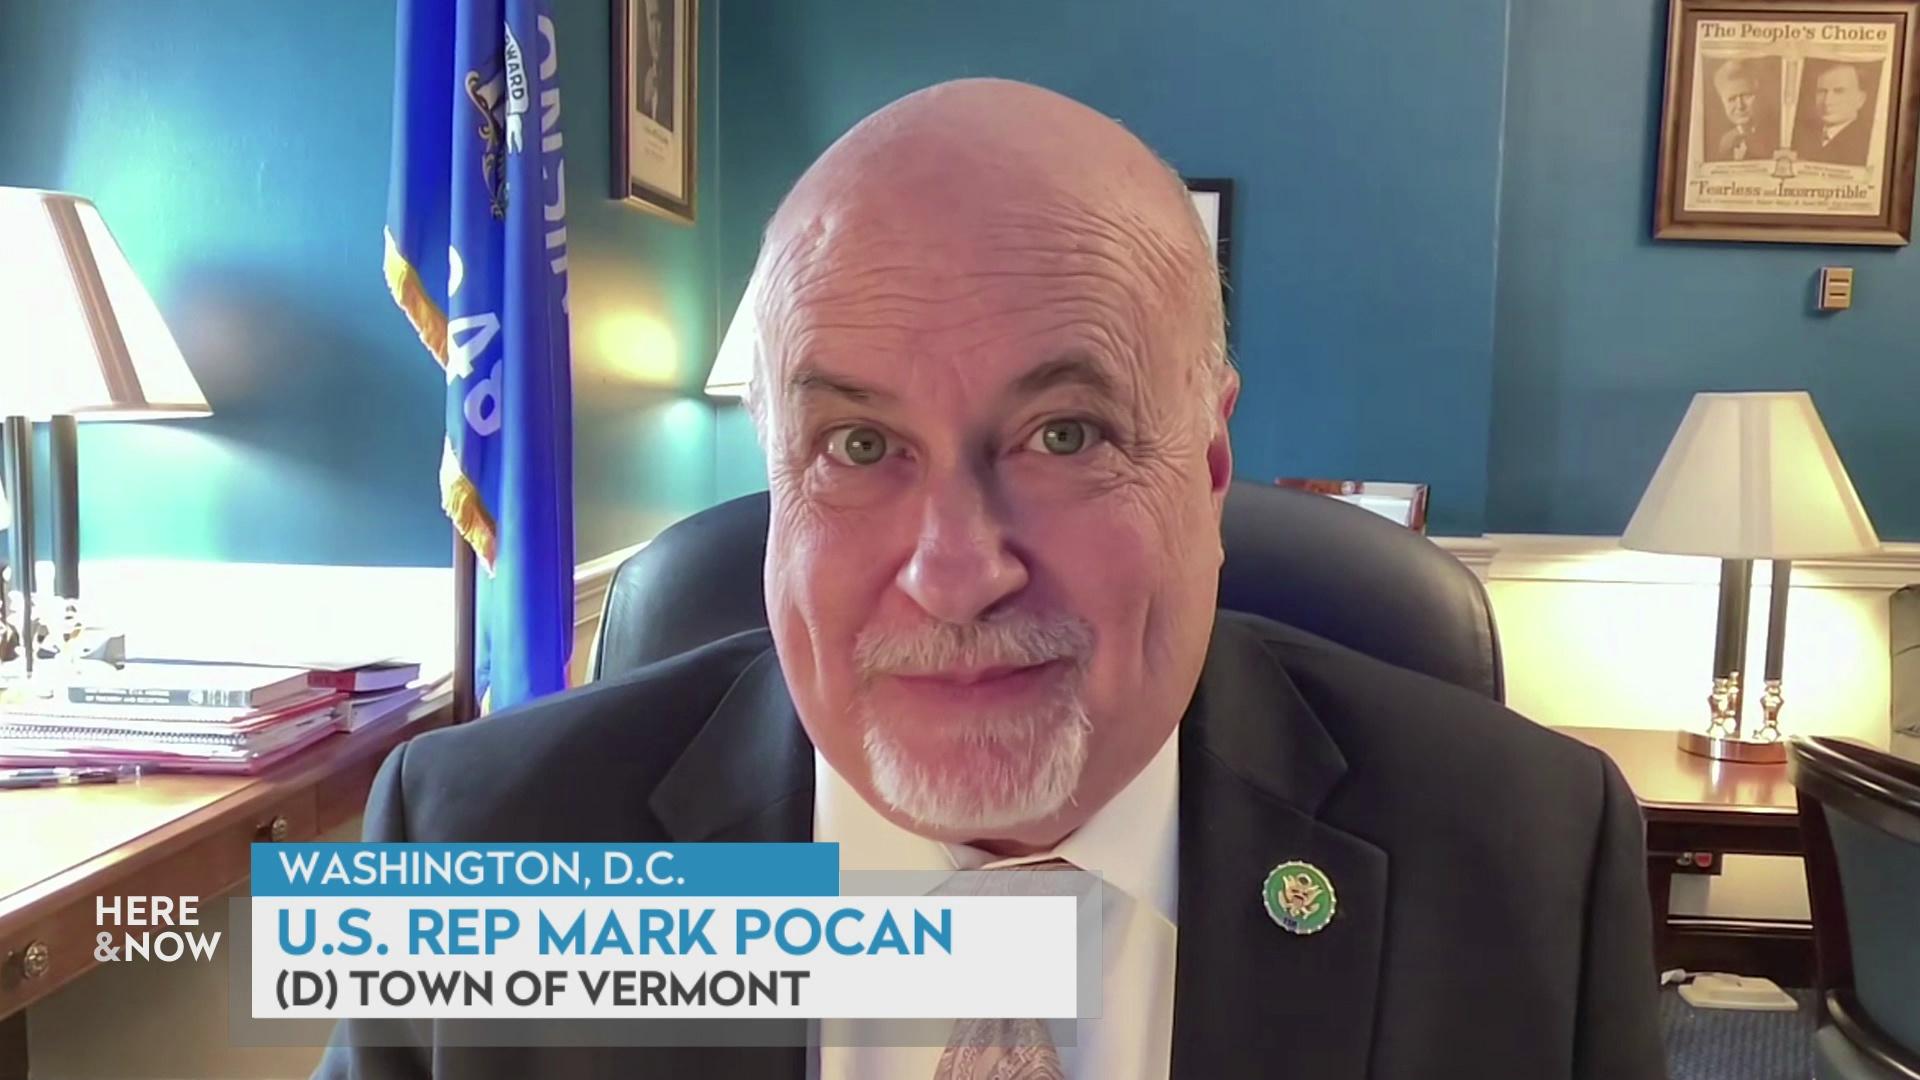 A still image from a video shows Mark Pocan seated in an office with blue walls and lamps on either side of him and a Wisconsin state flag with a graphic at bottom reading 'Washington, D.C.,' 'Mark Pocan' and '(D) Town of Vermont.'